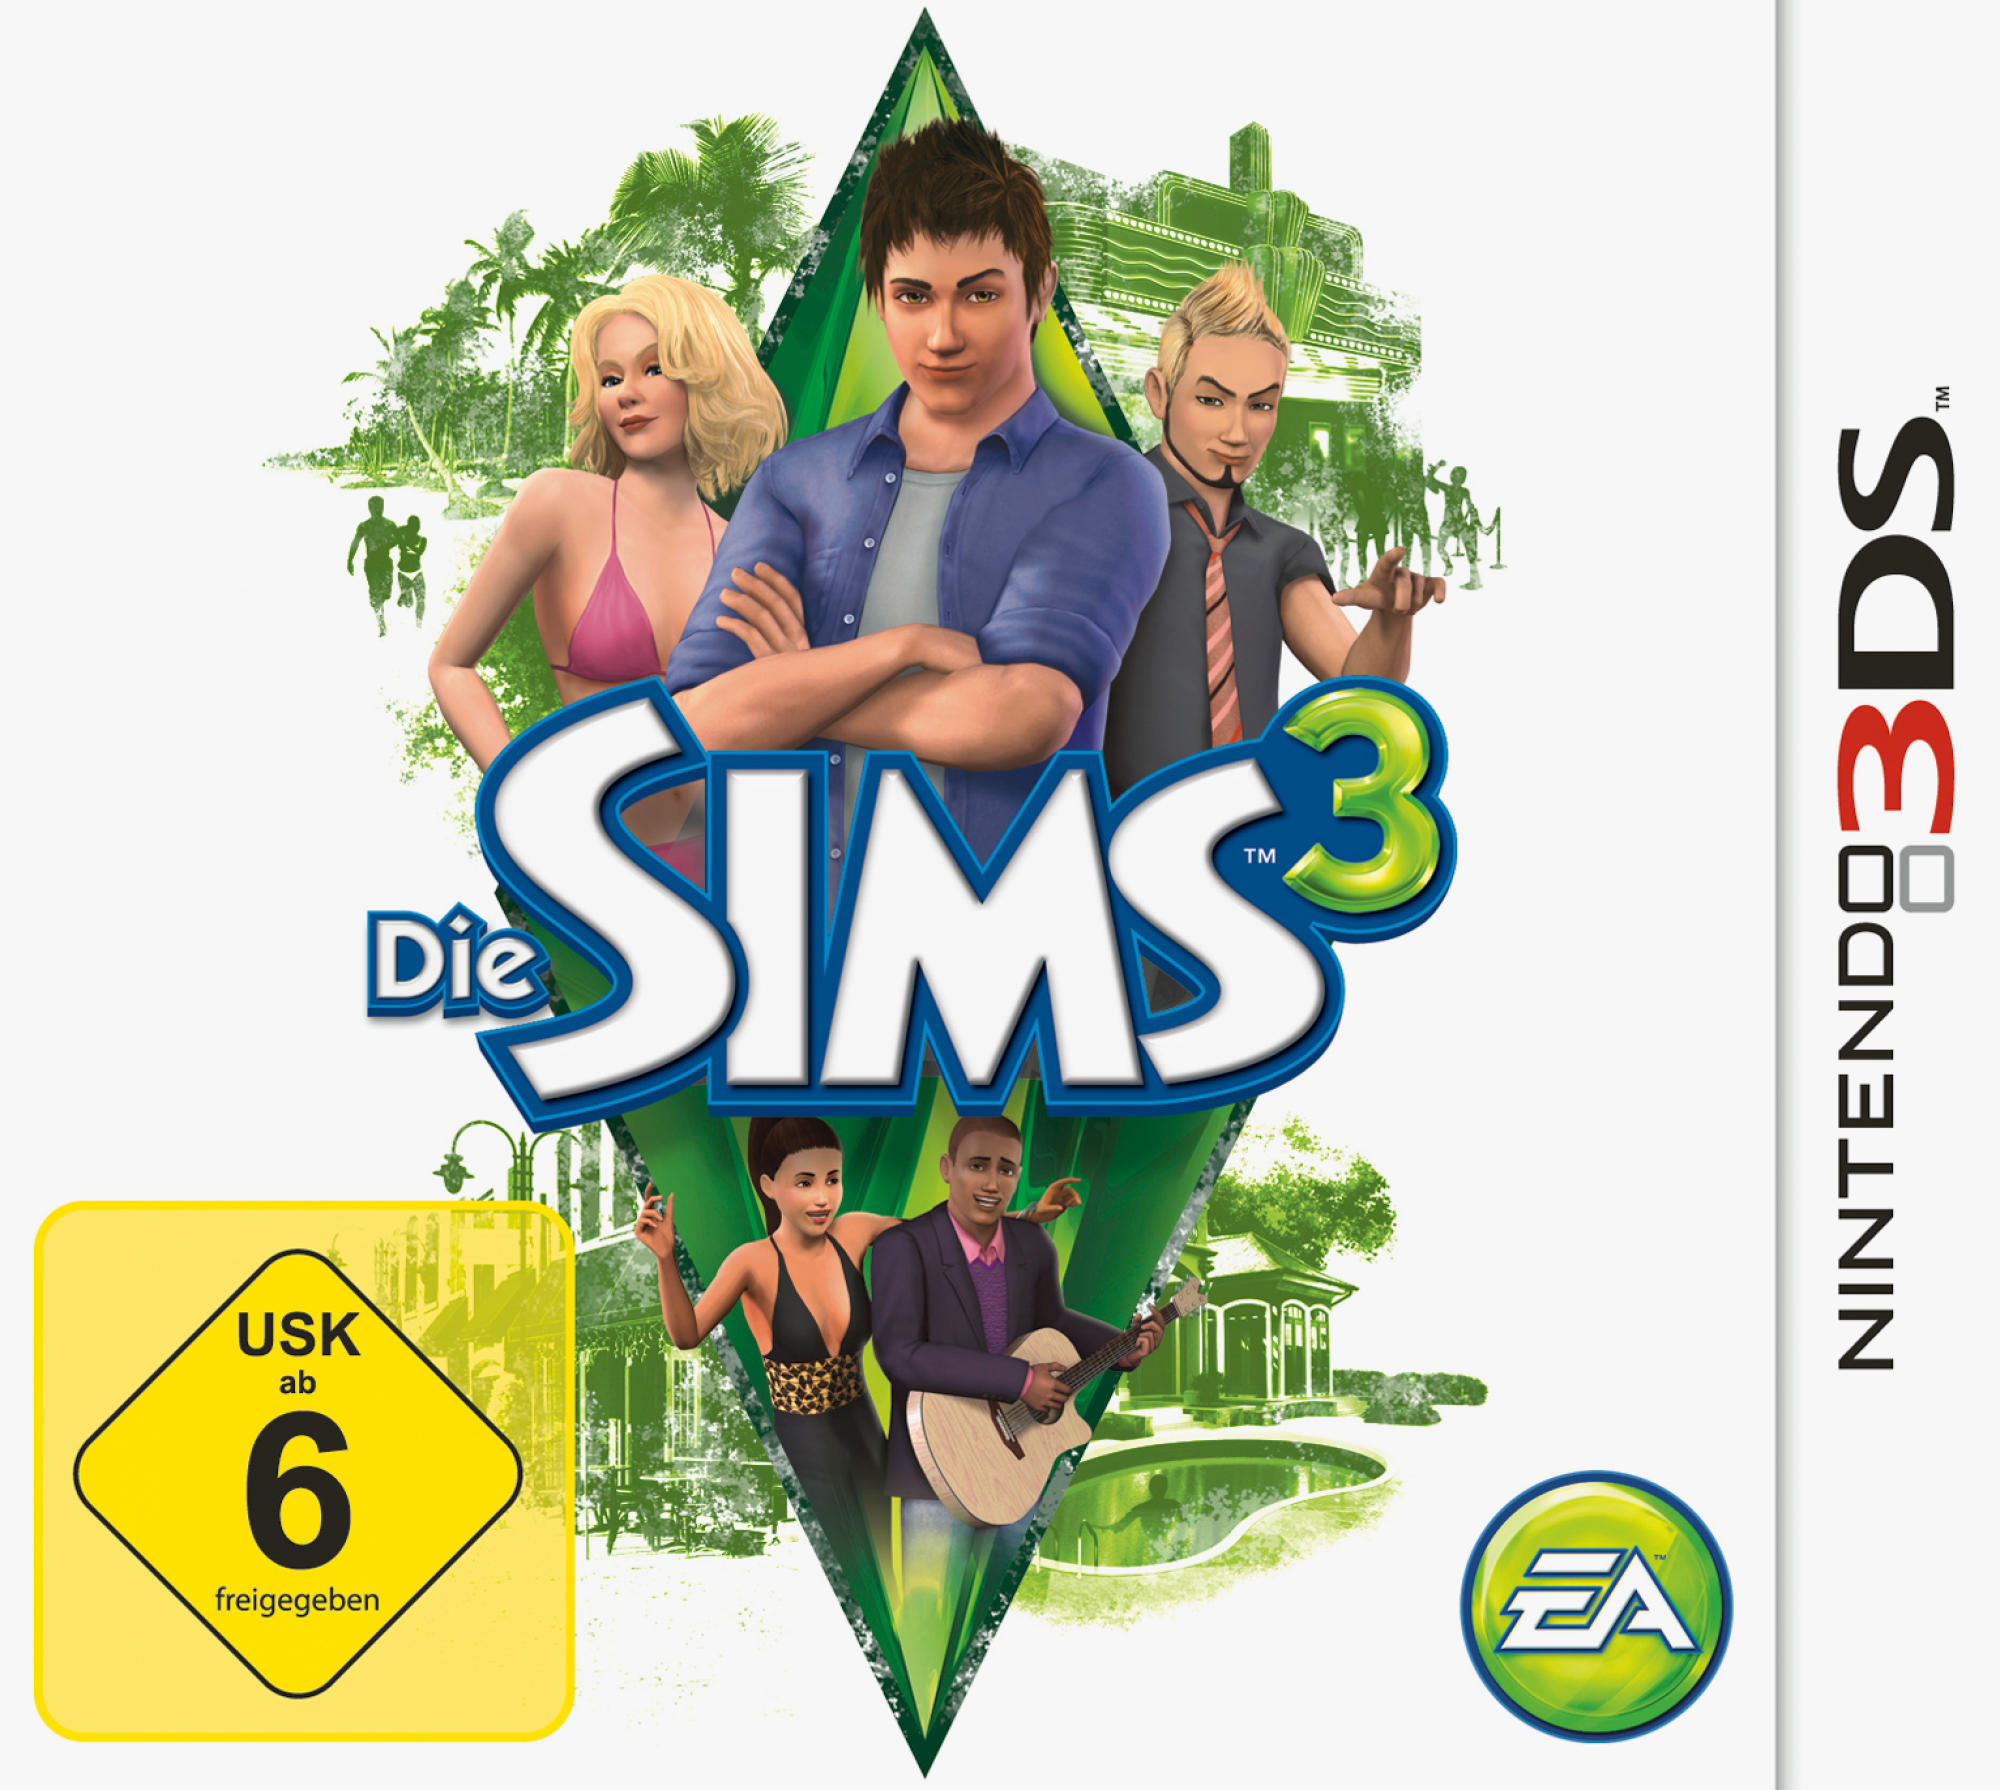 Die Sims 3 (Software Pyramide) [Nintendo - 3DS